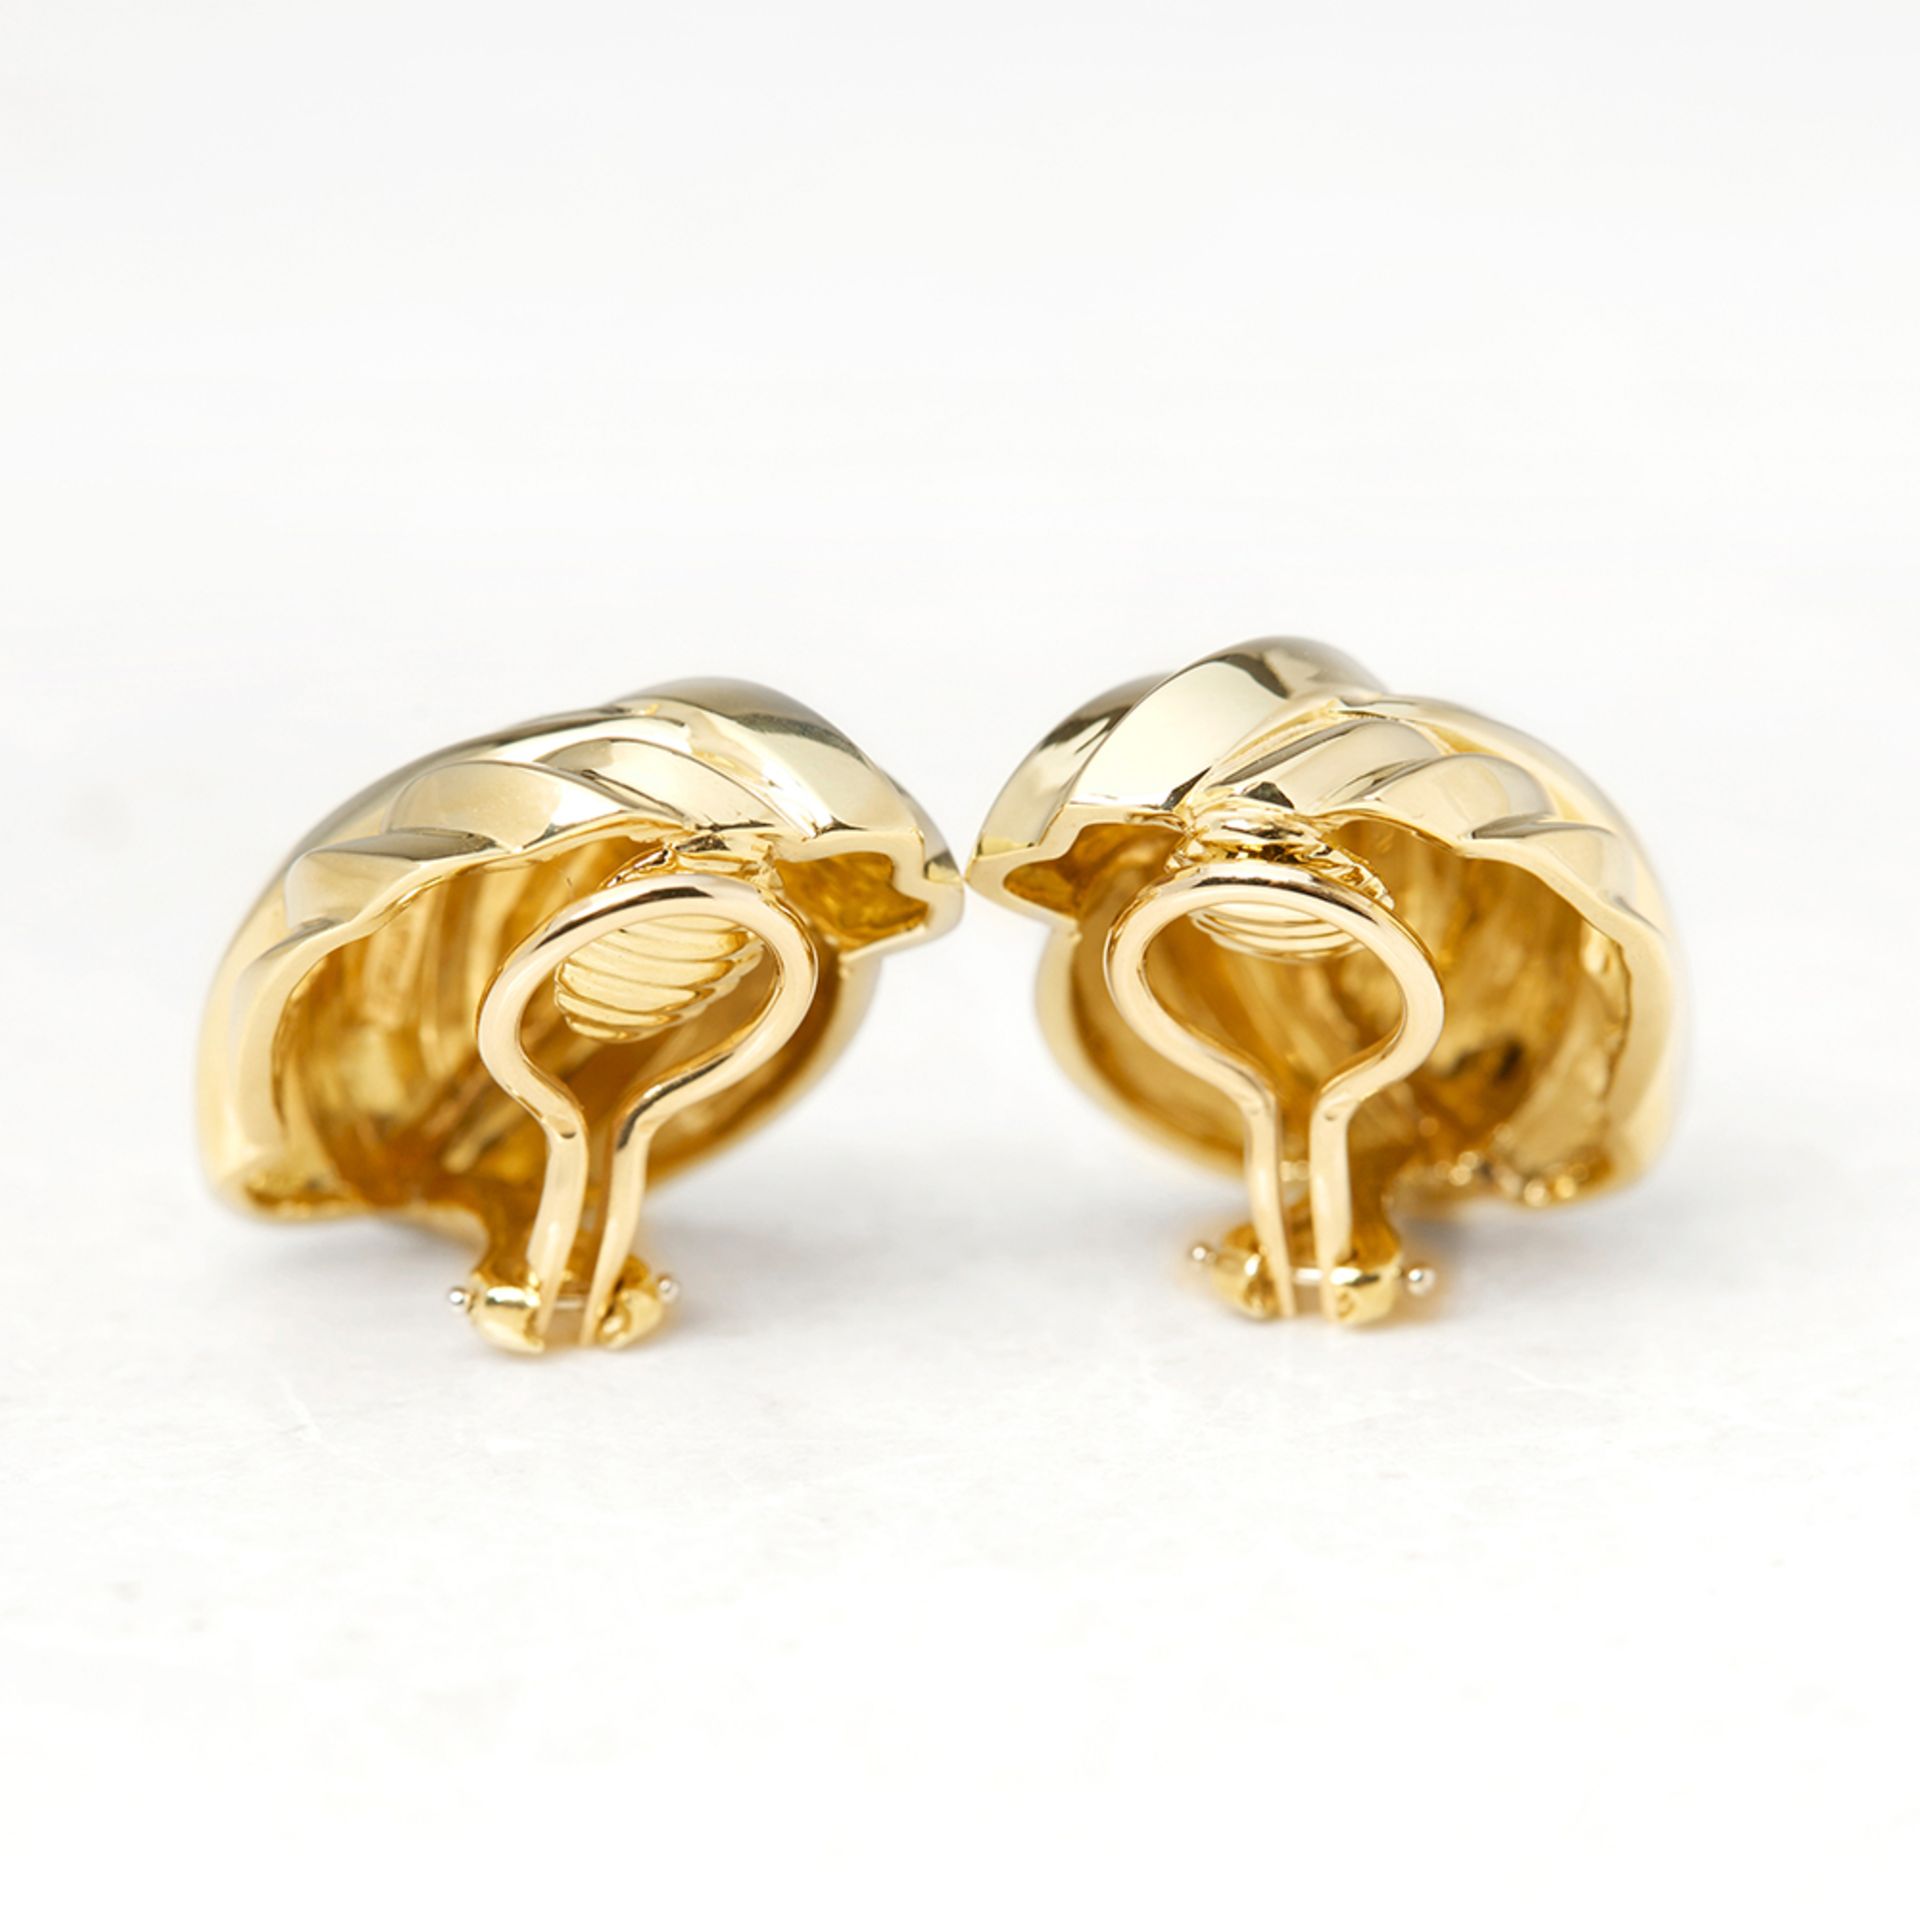 Tiffany & Co. 18k Yellow Gold Shell Design Clip-On Earrings - Image 6 of 8